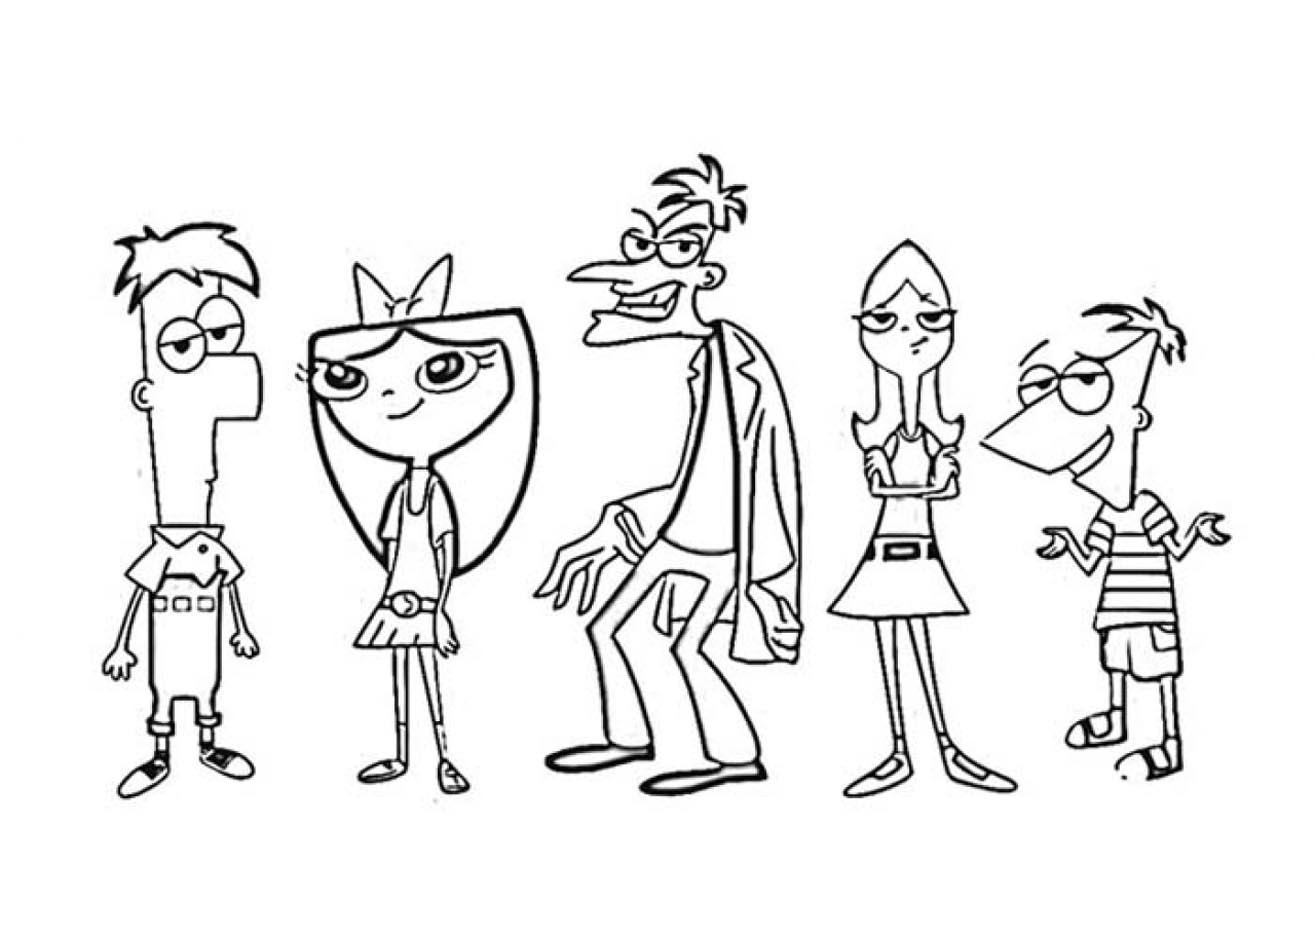 Phineas and Ferb (Disney) coloring pages to print and color